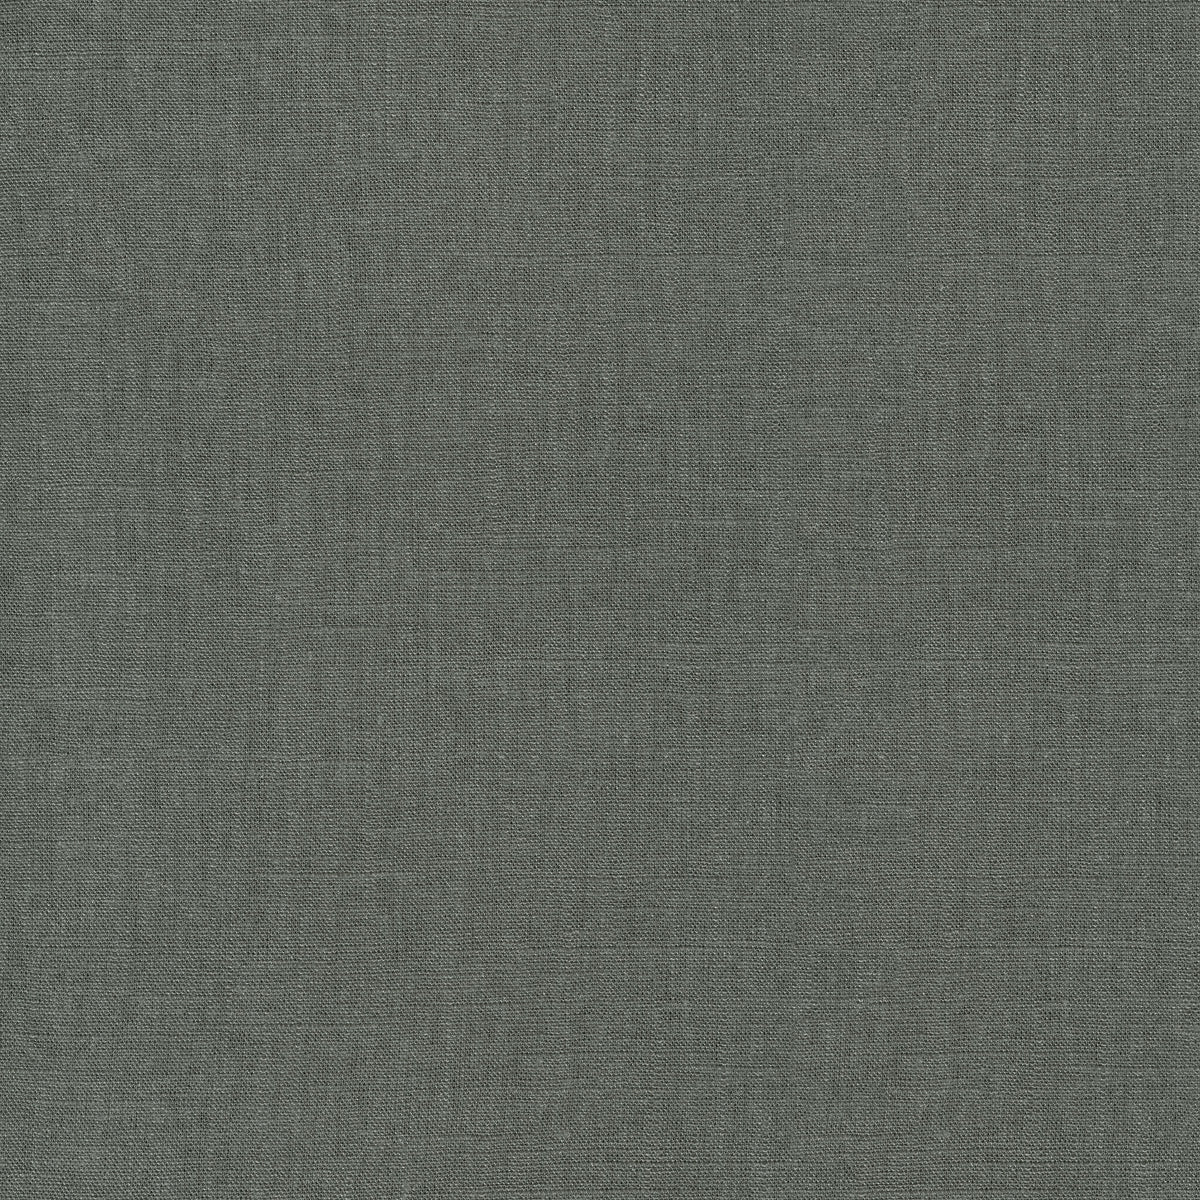 P/K Lifestyles Chester - Charcoal 412063 Upholstery Fabric